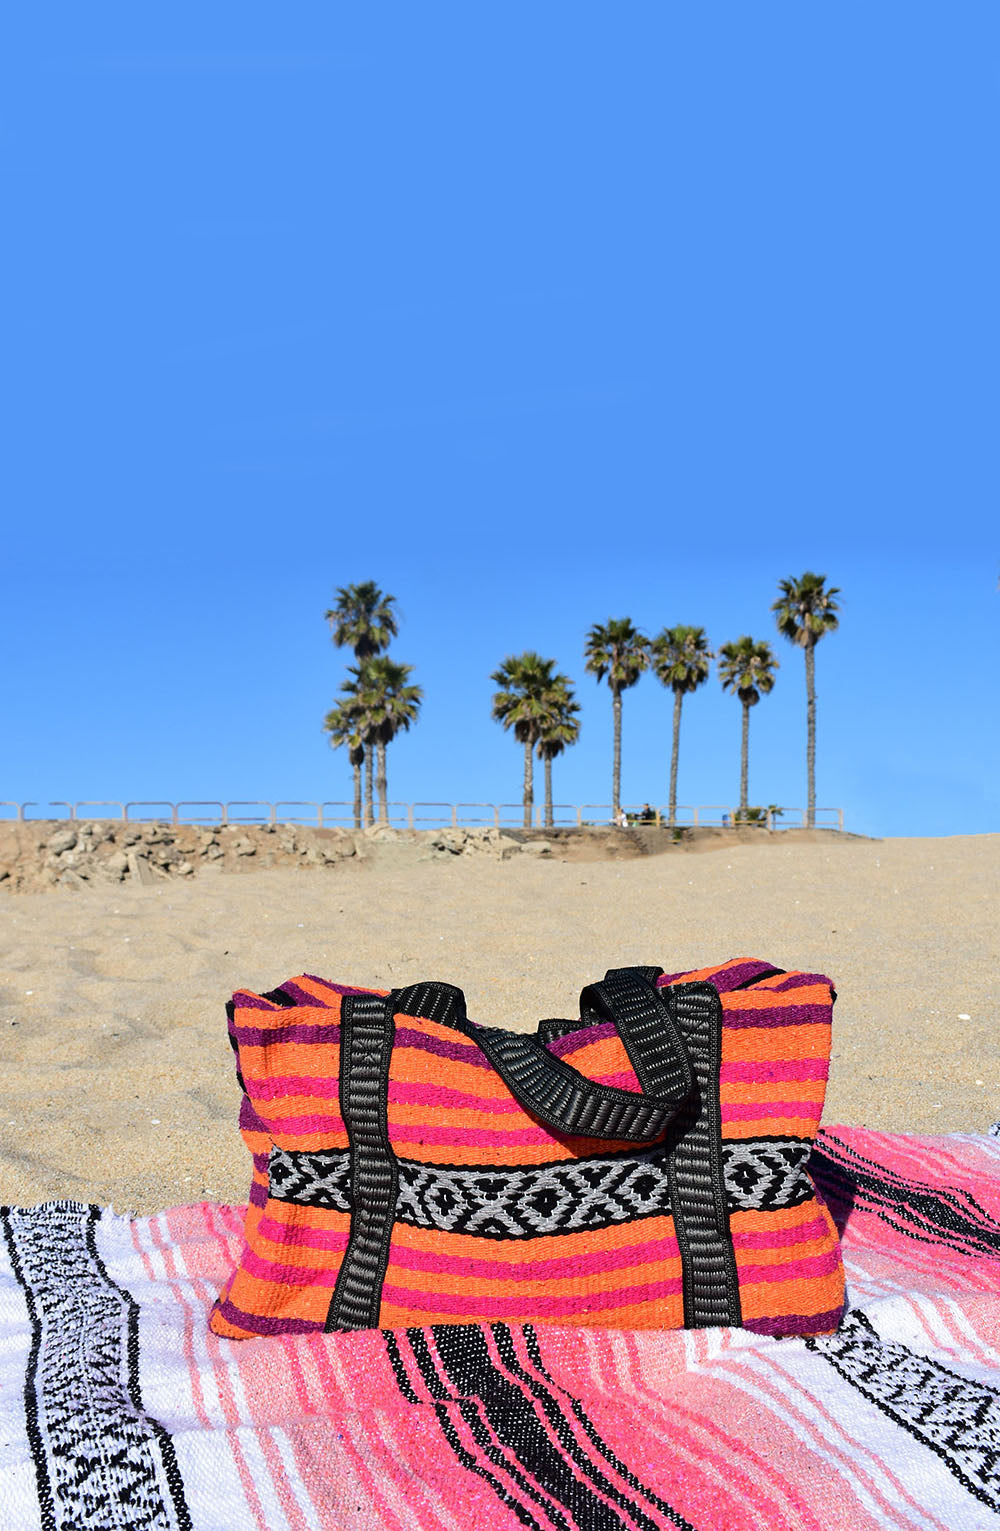 The essential travel bag of summer for the hippie at heart. Boho duffel bag – Bohemian bag – Carry on bag - Unique bag.